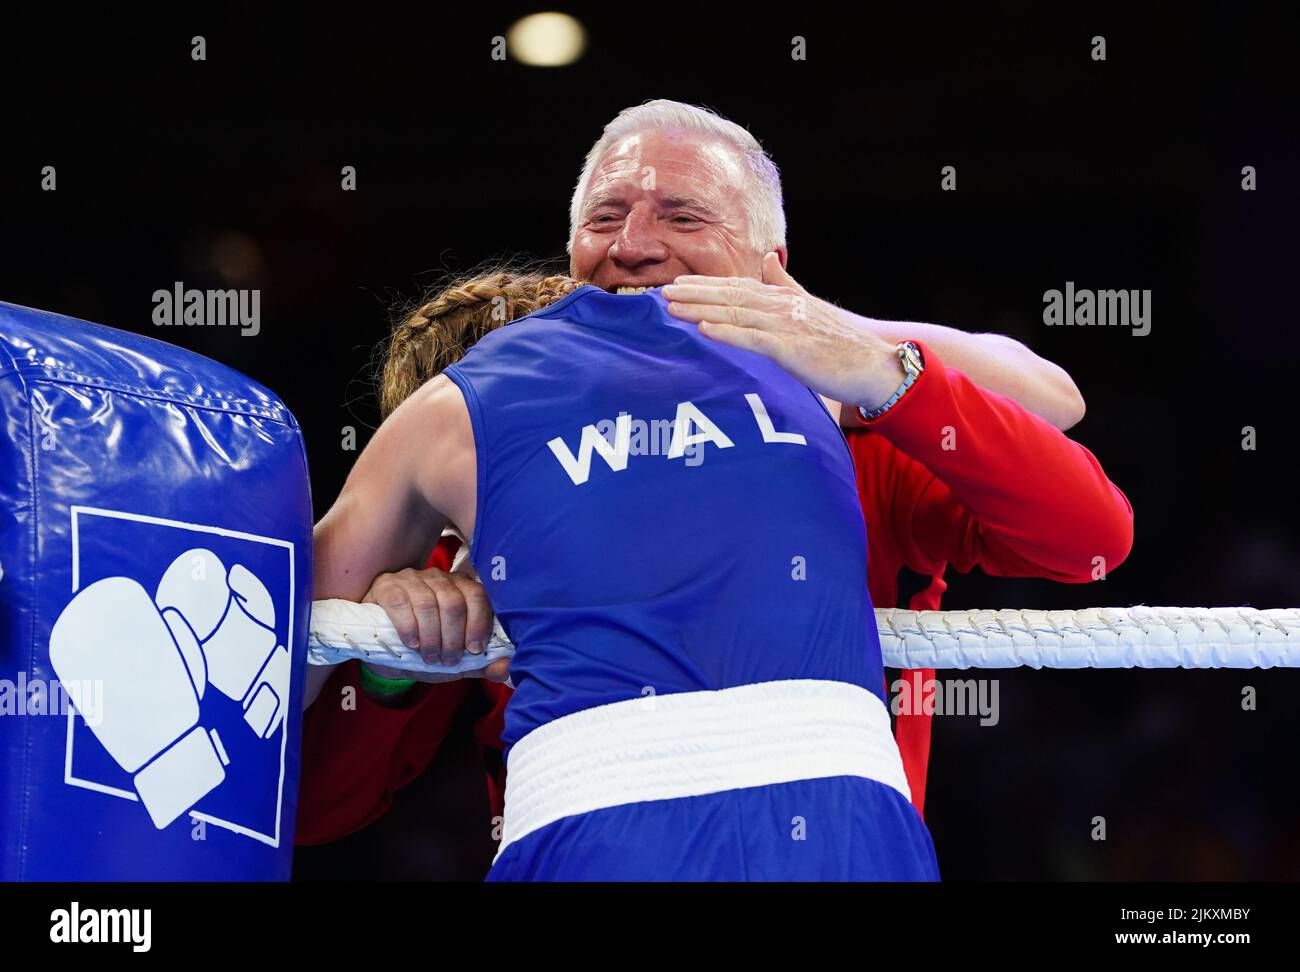 Wales' Head Boxing coach Colin Jones celebrates with Rosie Eccles during the Women’s Over 66kg-70kg (Light Middle) - Quarter-Final 4 at The NEC on day six of the 2022 Commonwealth Games in Birmingham. Picture date: Wednesday August 3, 2022. Stock Photo